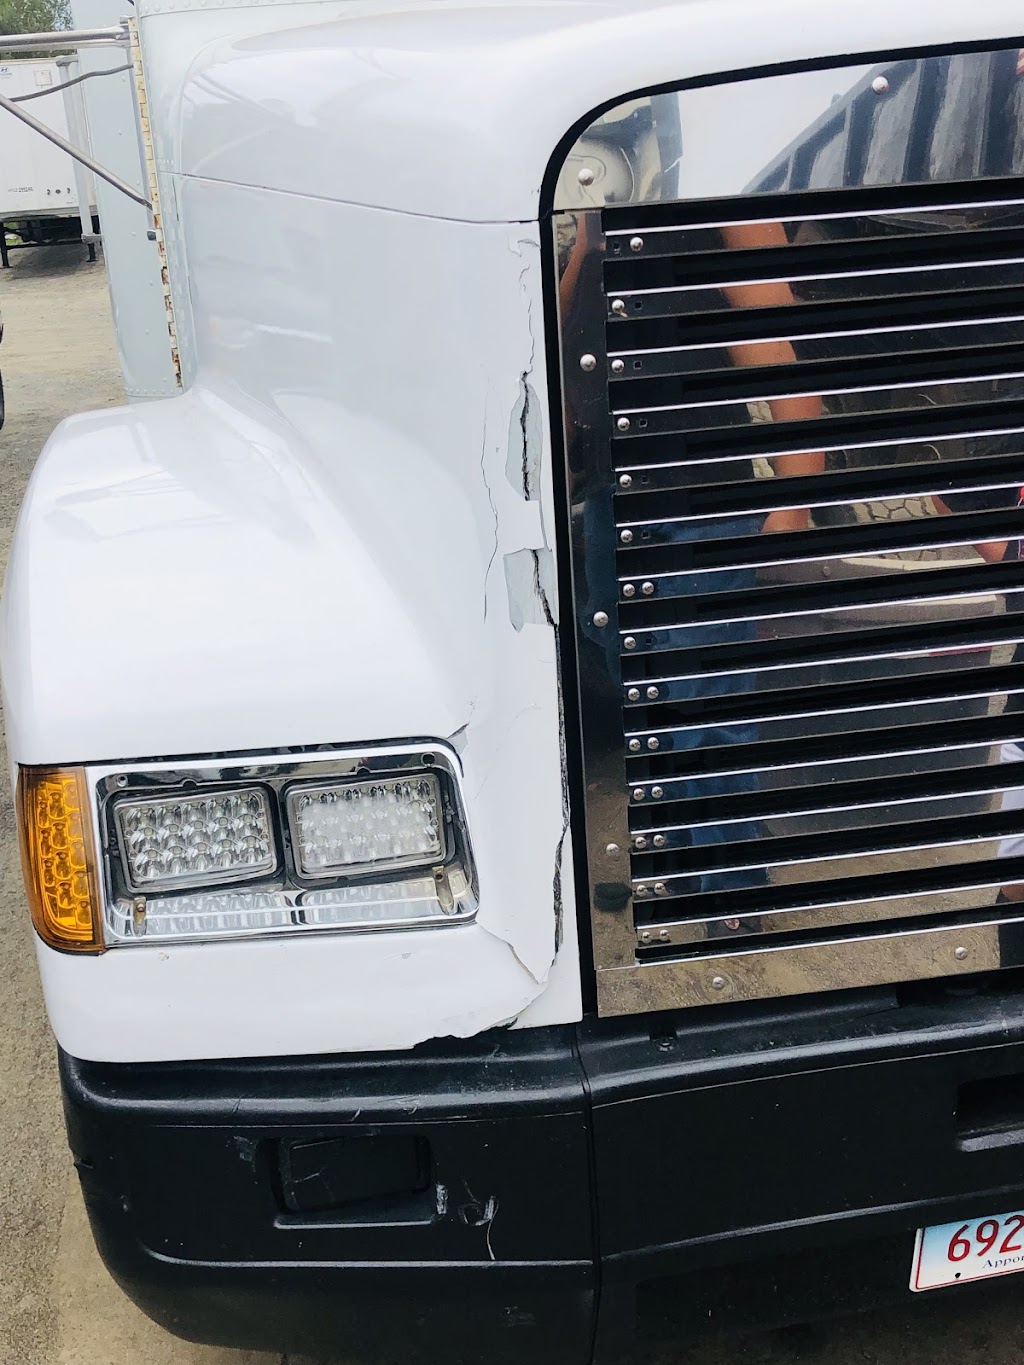 Southern Connecticut Freightliner | 15 E Industrial Rd, Branford, CT 06405 | Phone: (203) 481-0373